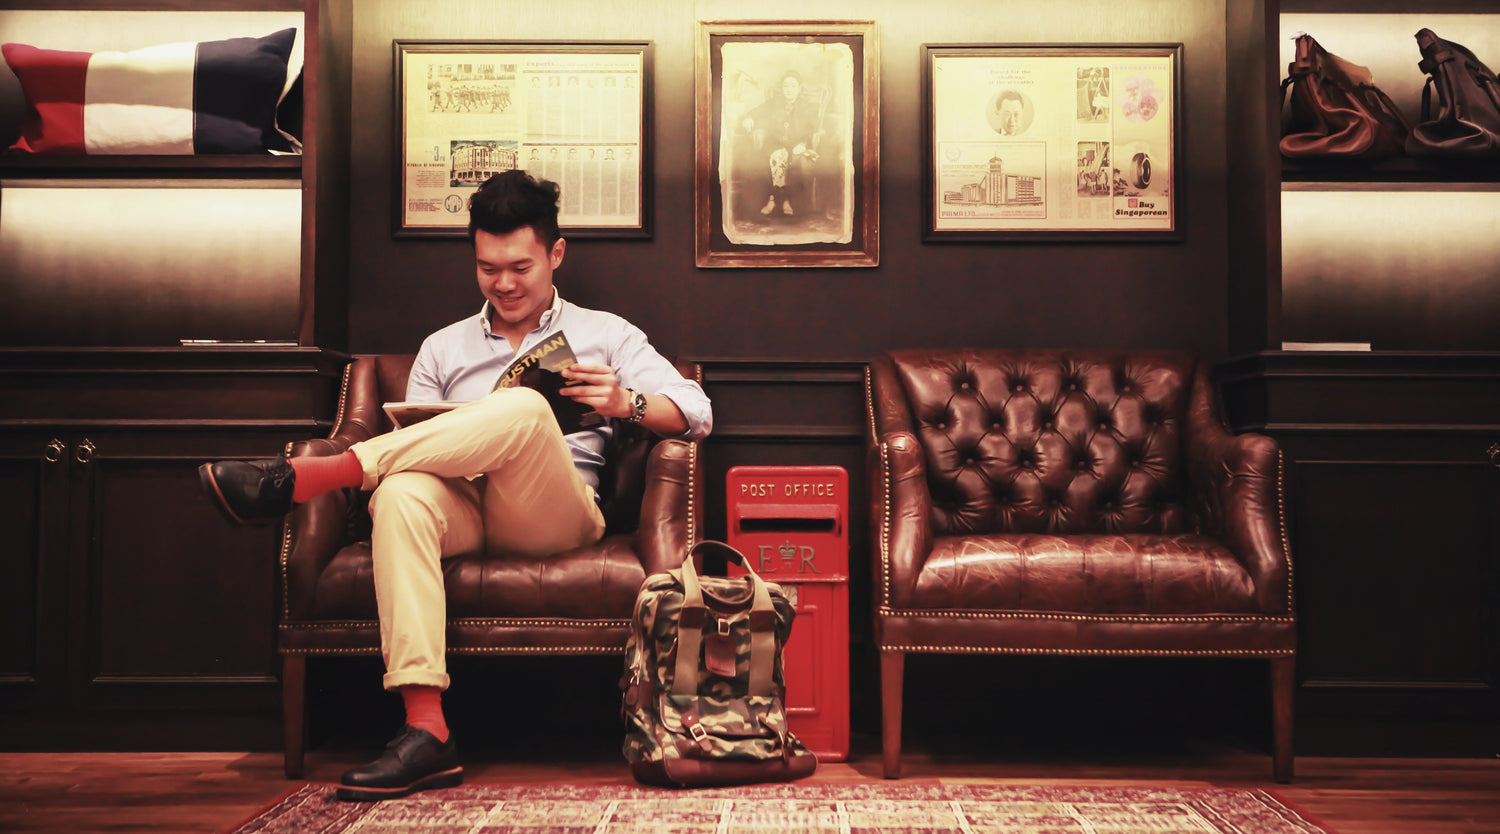 6th Oct | Creative Capital: The Singaporean entrepreneur who tells stories through clever bags (CNA Lifestyle)